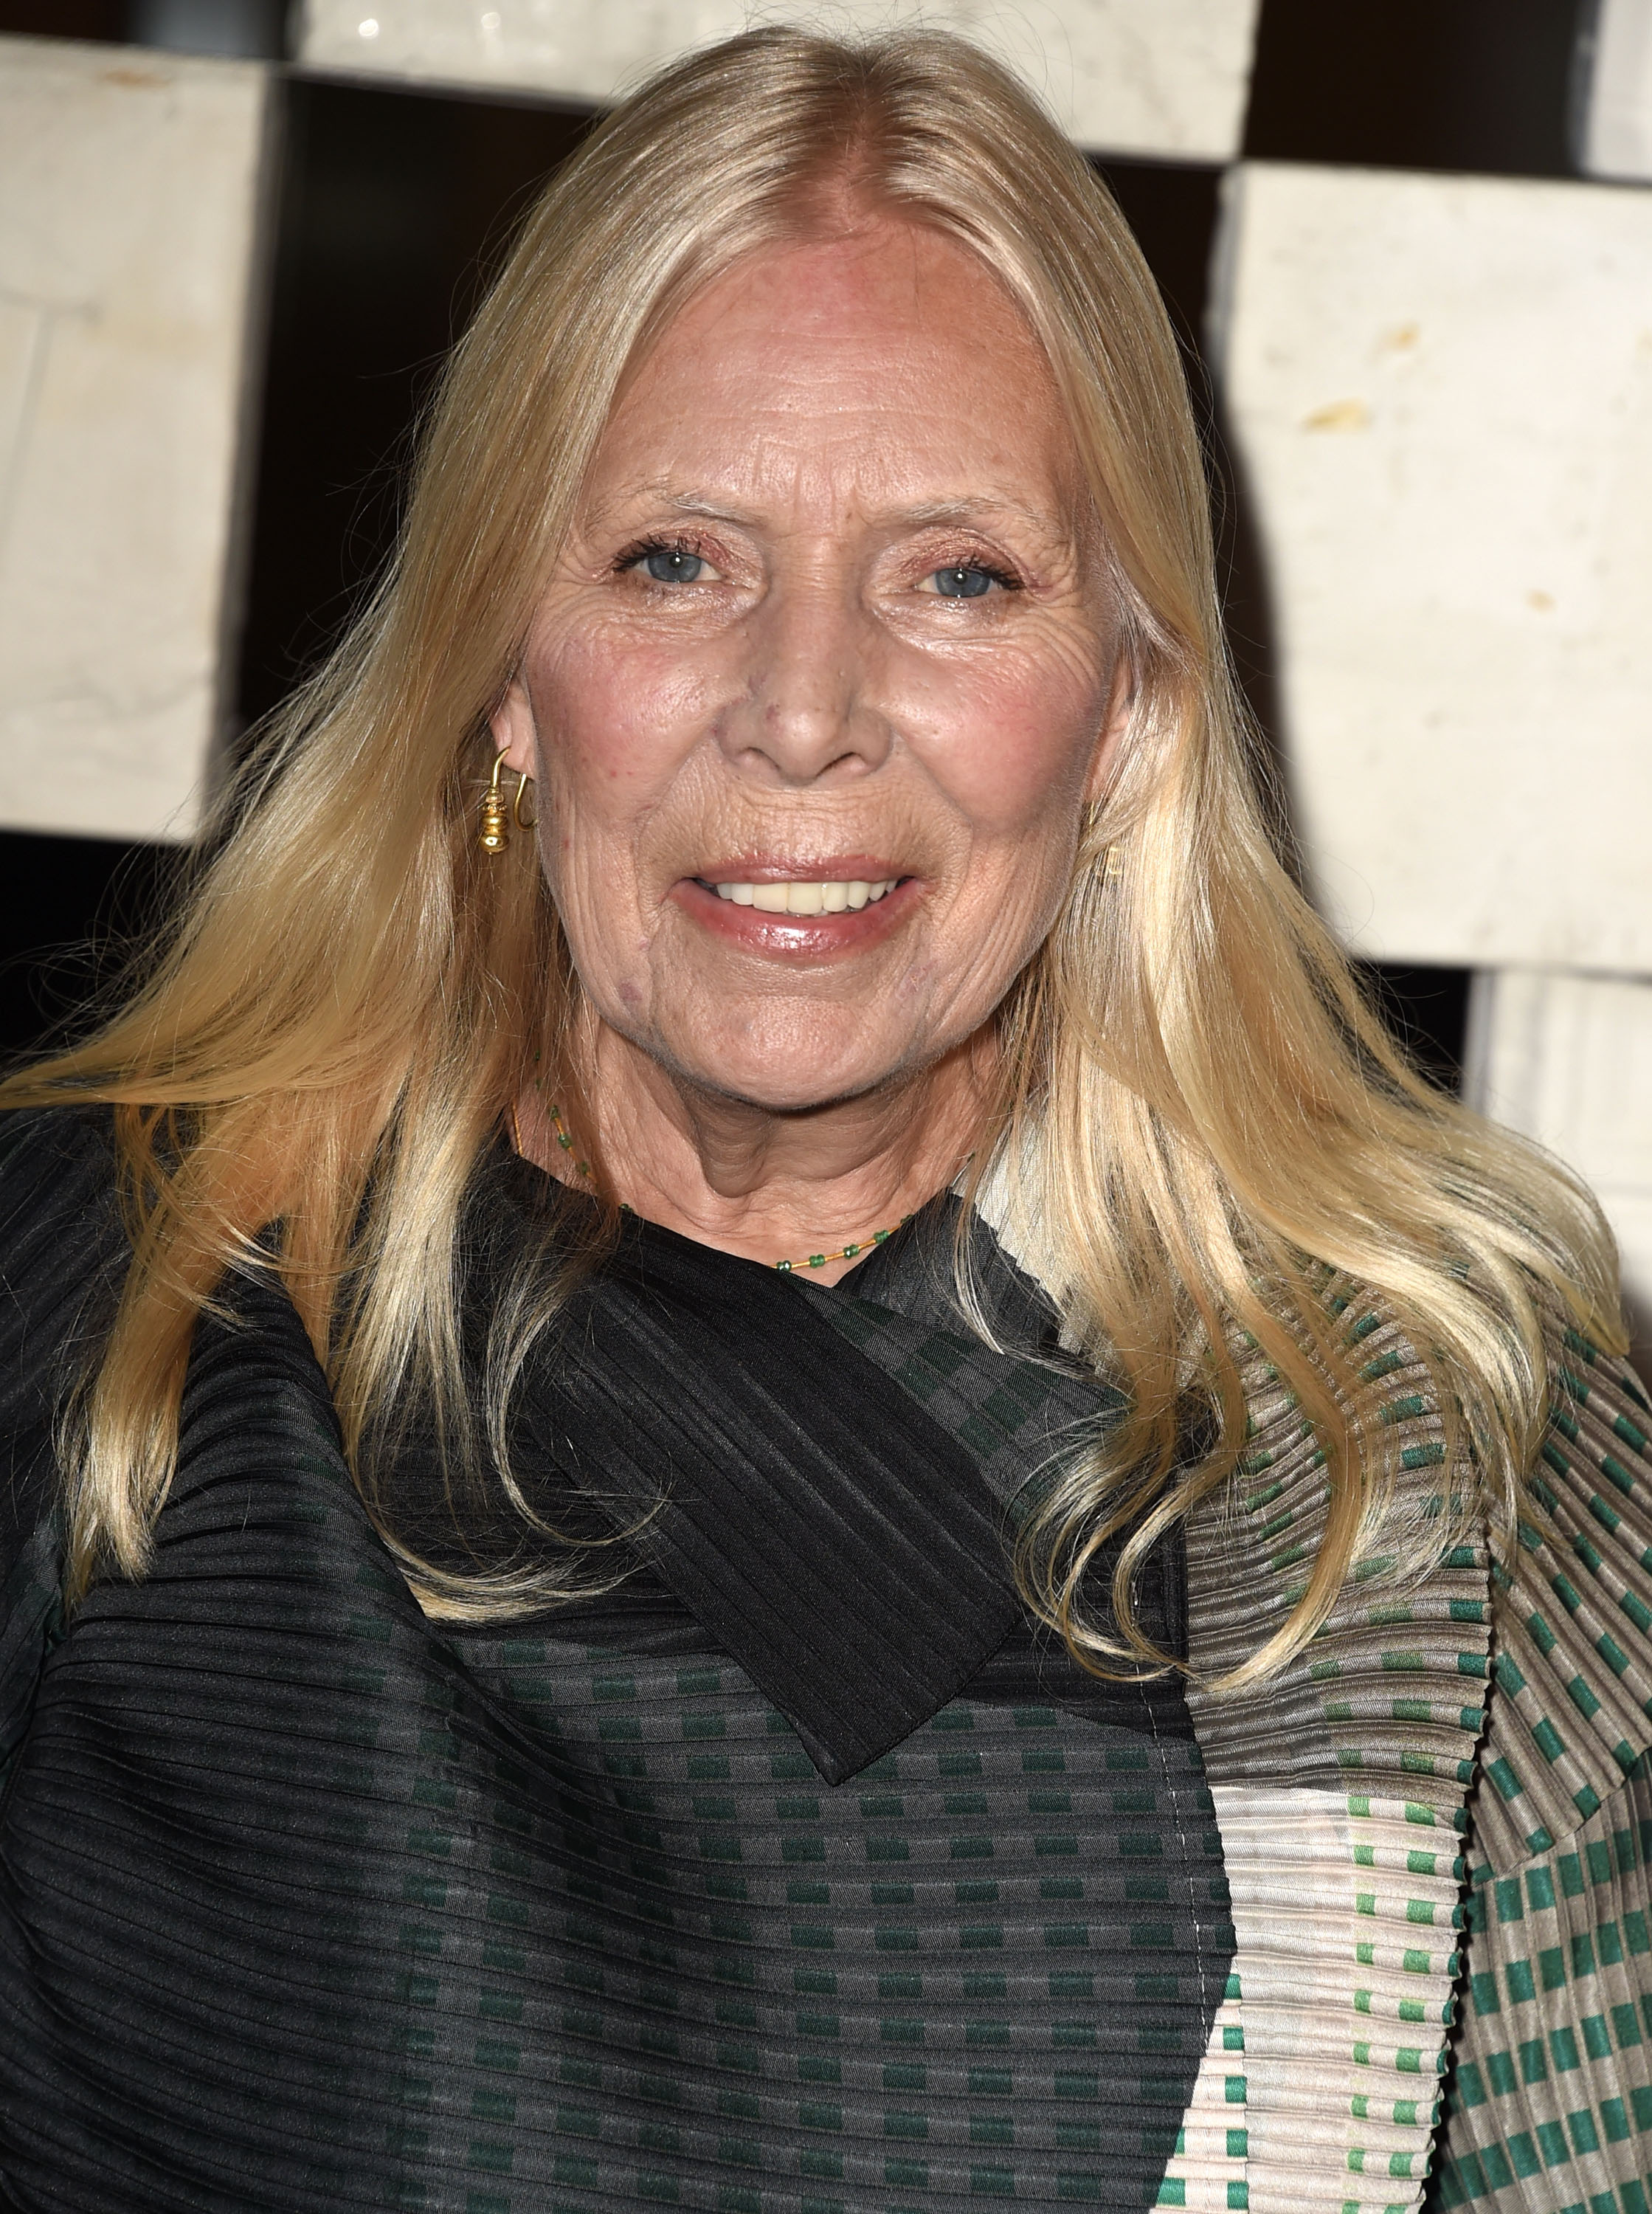 Joni Mitchell on October 11, 2014 in Westwood, Calif. (Steve Granitz—WireImage/Getty Images)